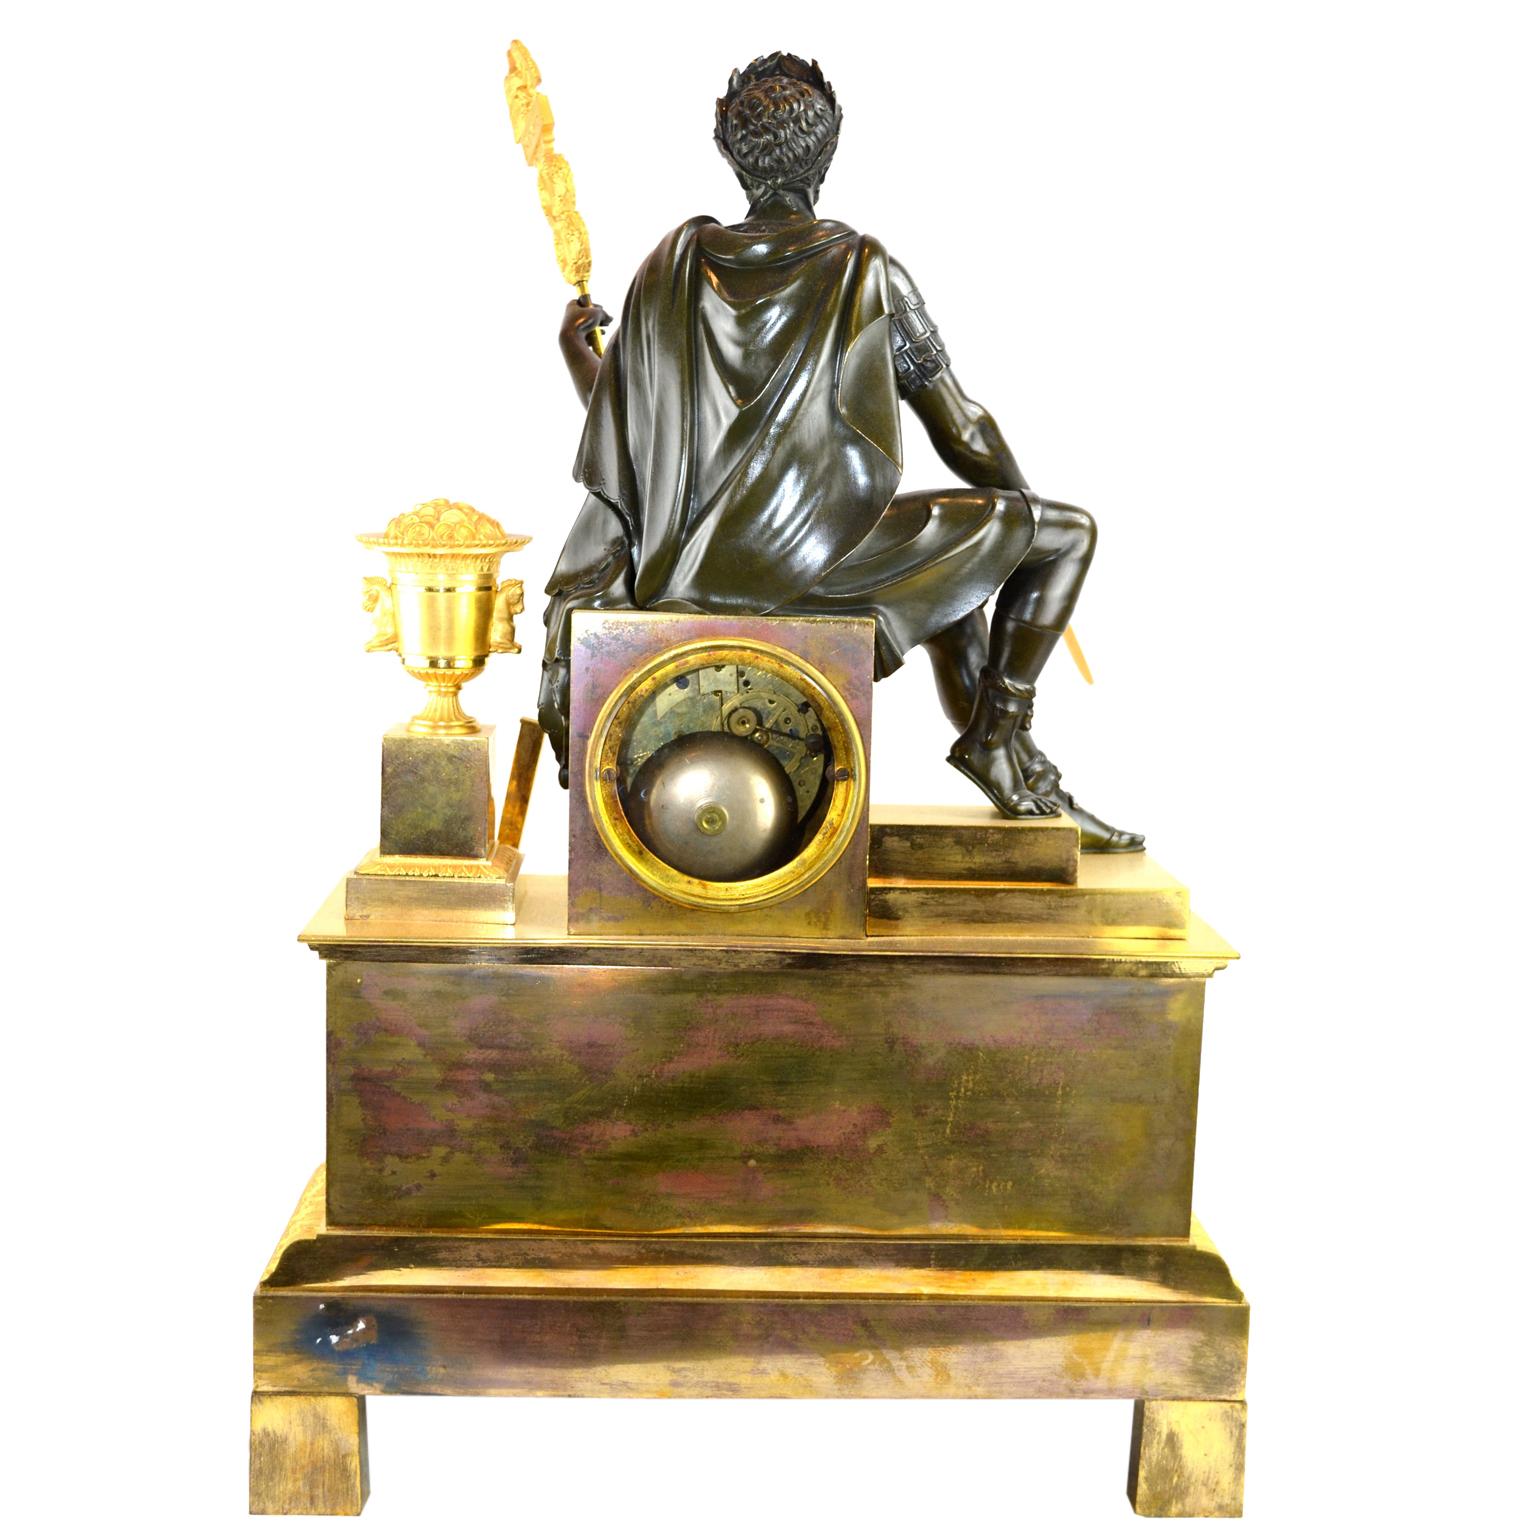 A late French Empire period mantel (fireplace) clock showing a seated Roman emperor in finely chased patinated bronze holding a sword in one hand and a Roman banner in the other. He sits atop a rectangular plinth which houses the original silver